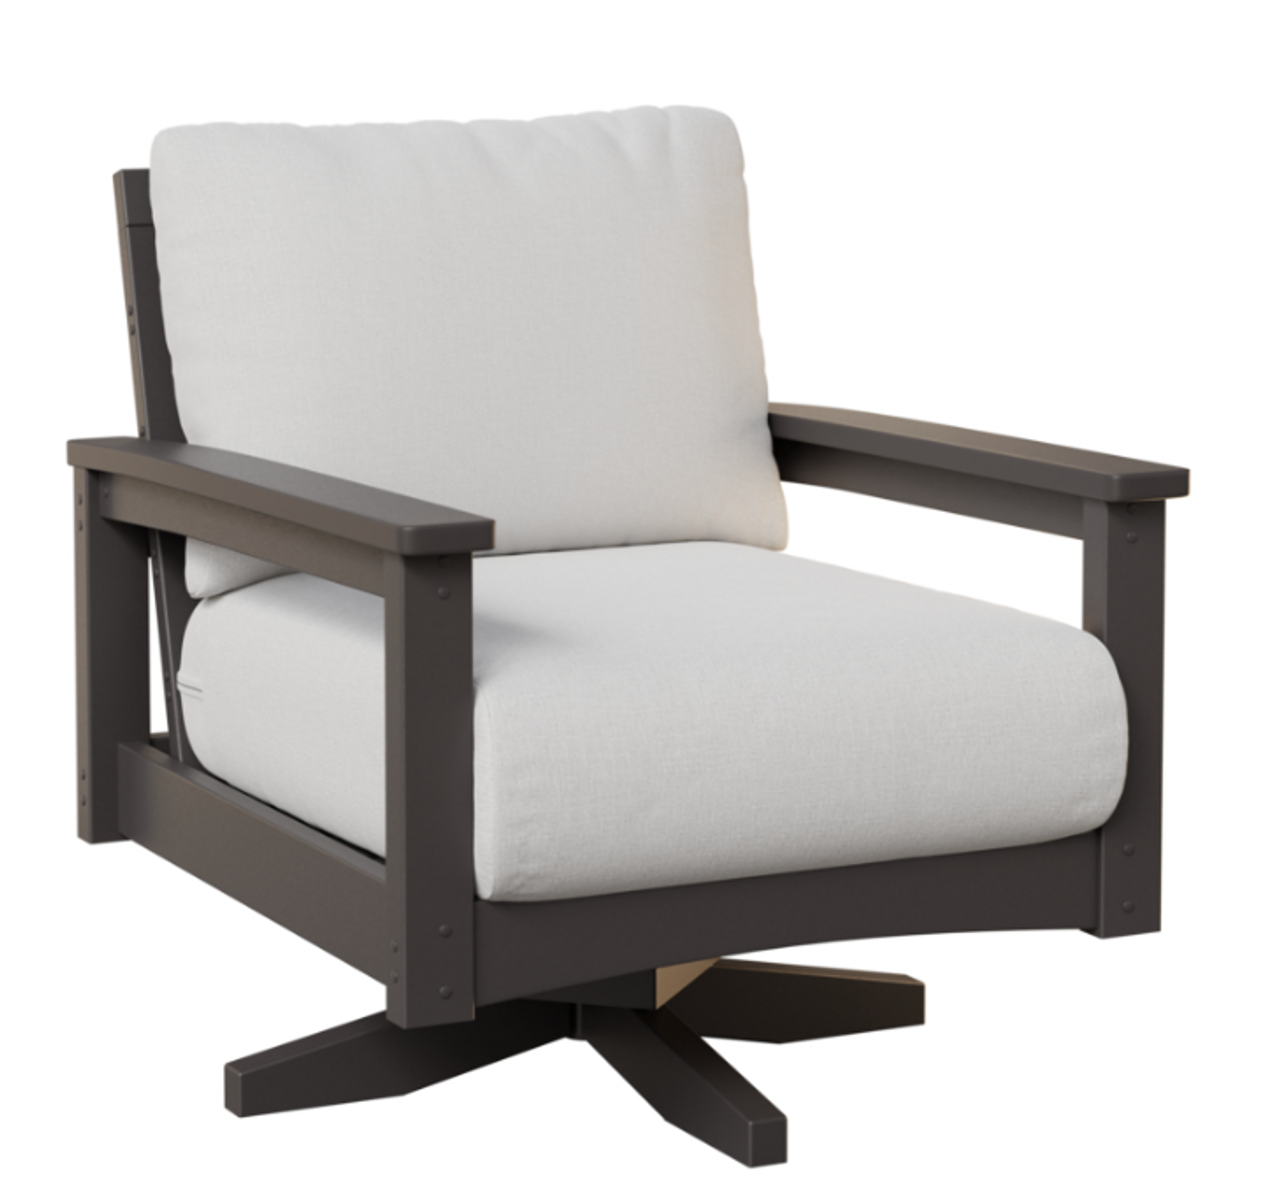 Shown in Smoke Grey Standard Color Frame with Cushion fabric to be selected